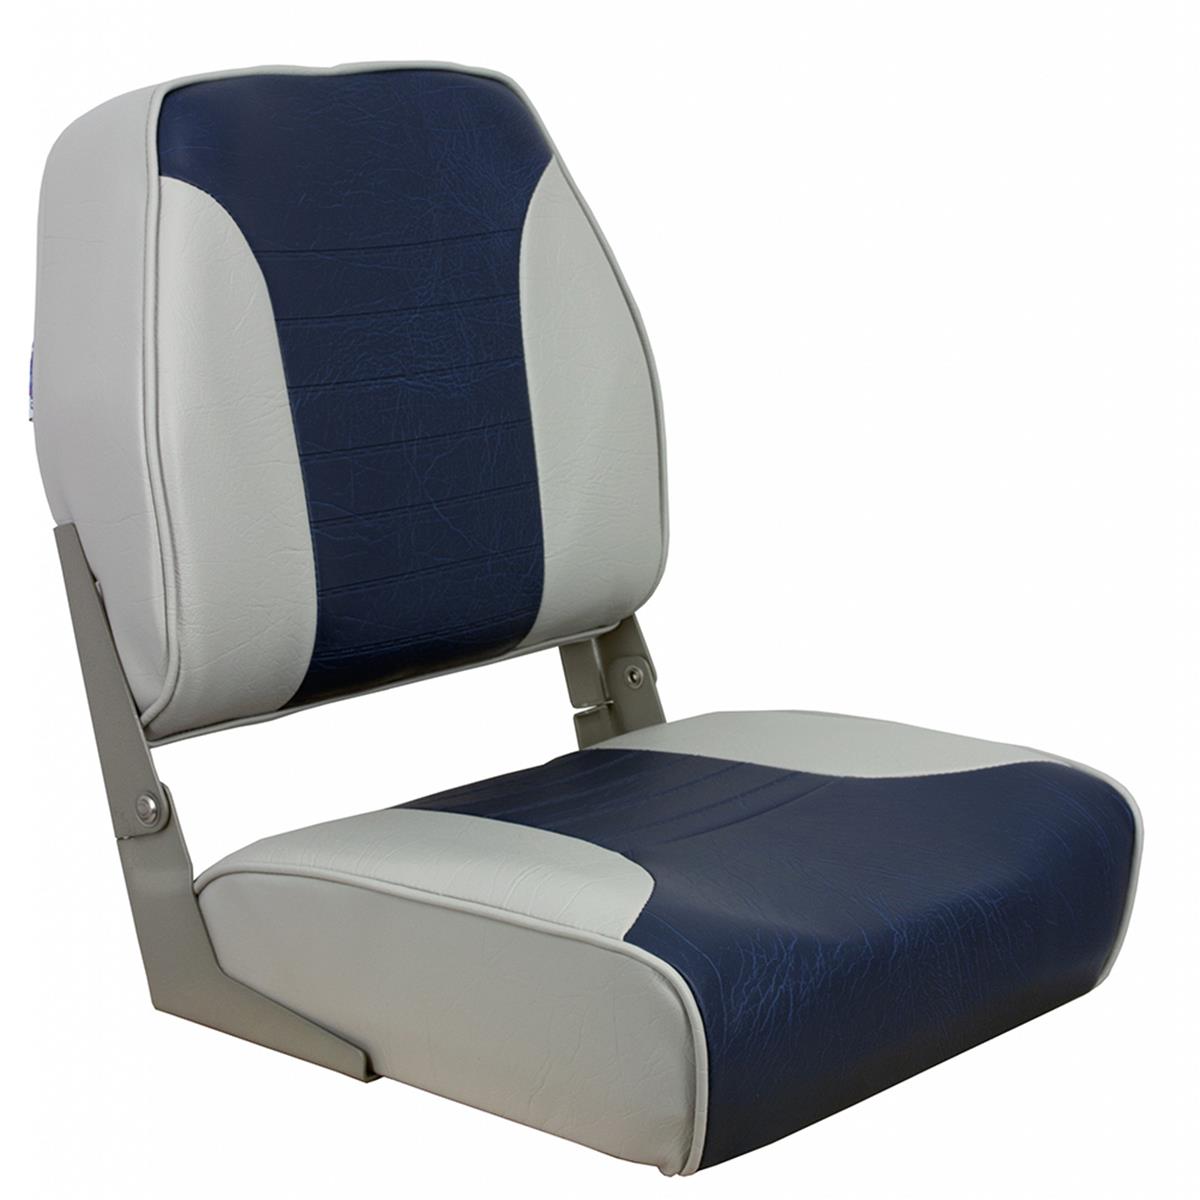 Picture of Springfield Marine 1040651 Economy Multi-Color Folding Seat - Grey & Blue